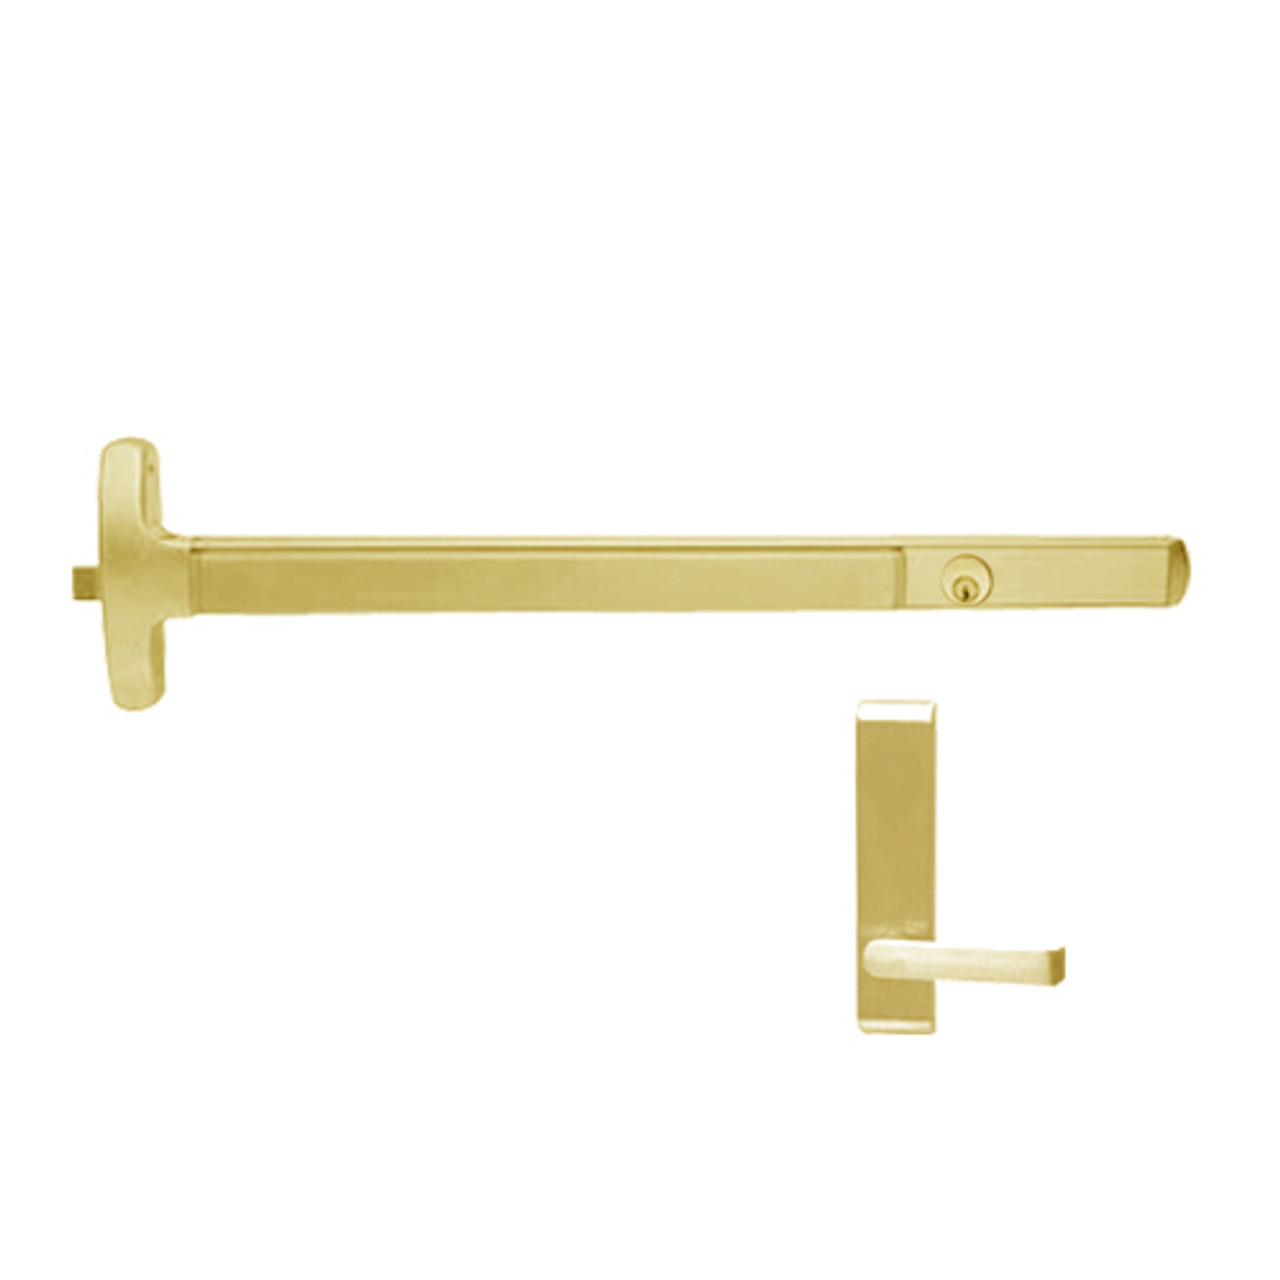 CD24-R-L-DT-DANE-US3-3-LHR Falcon Exit Device in Polished Brass